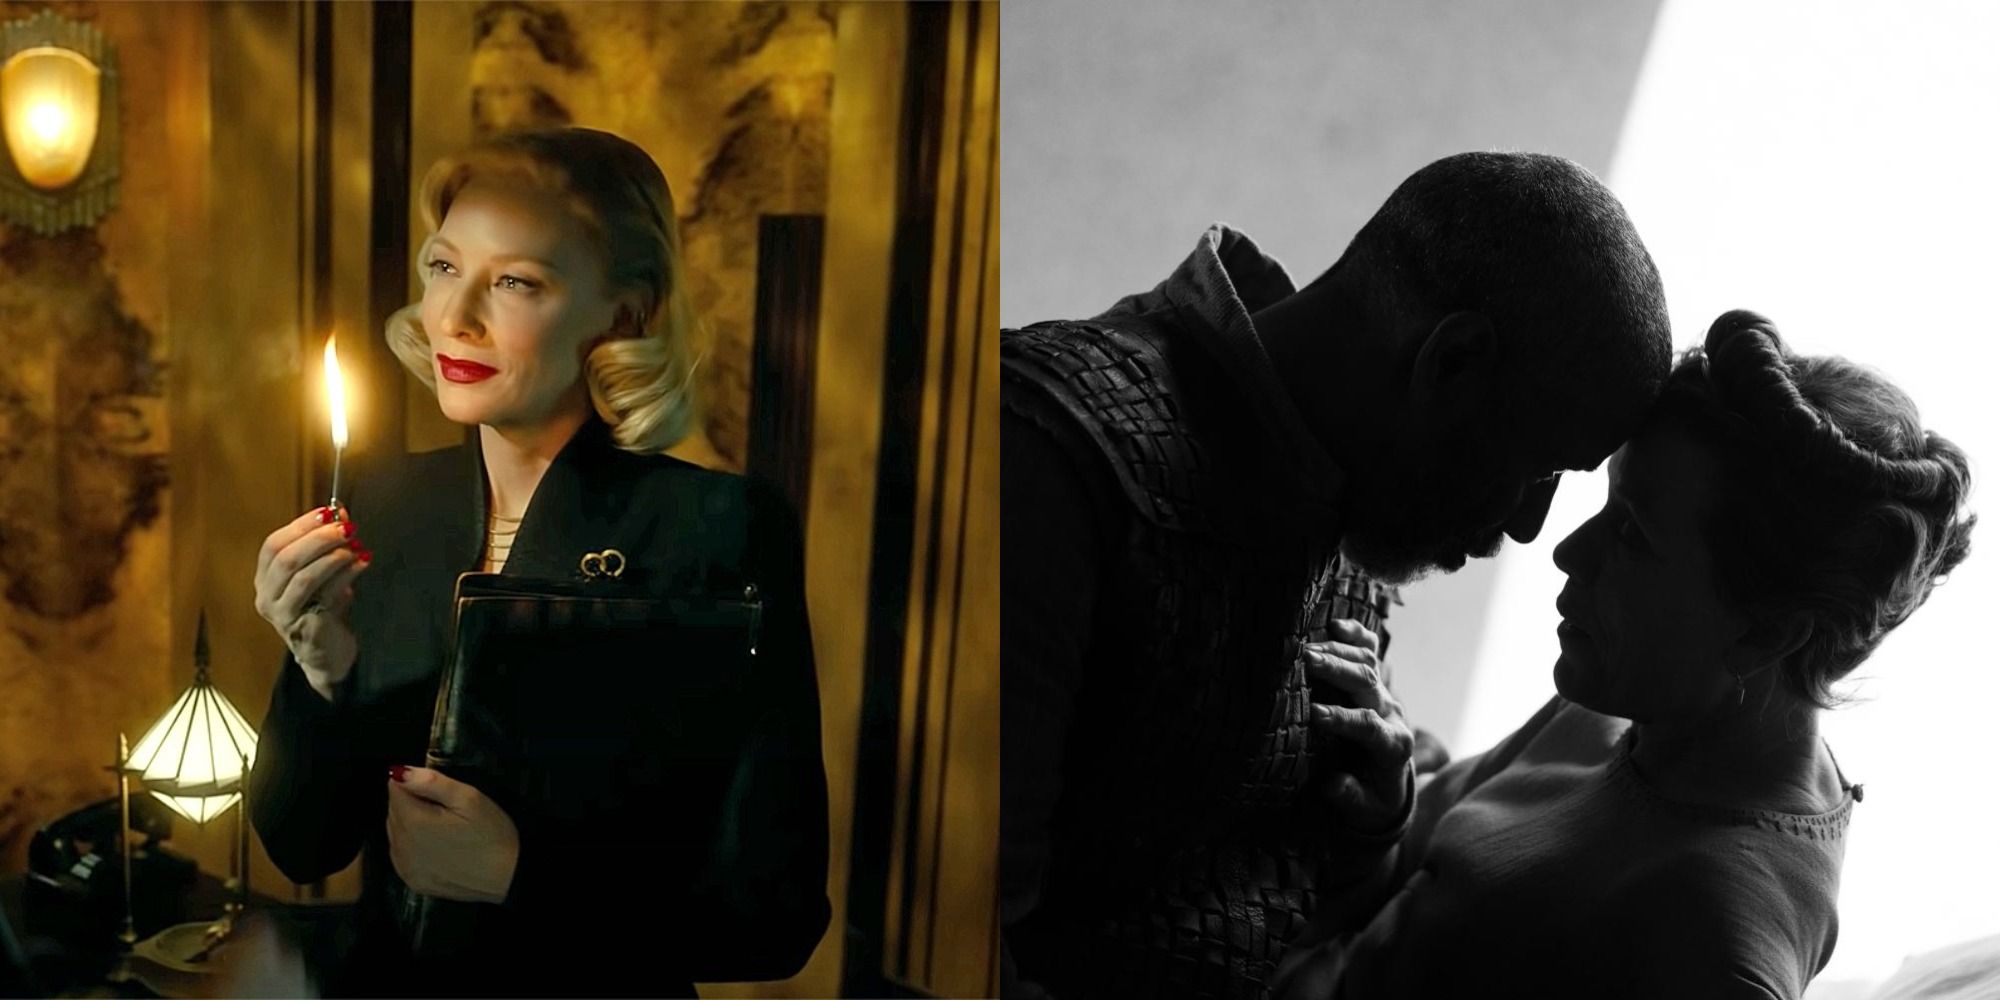 Split image showing Lilith in Nightmare Alley and Lord and Lady Macbeth in The Tragedy of Macbeth